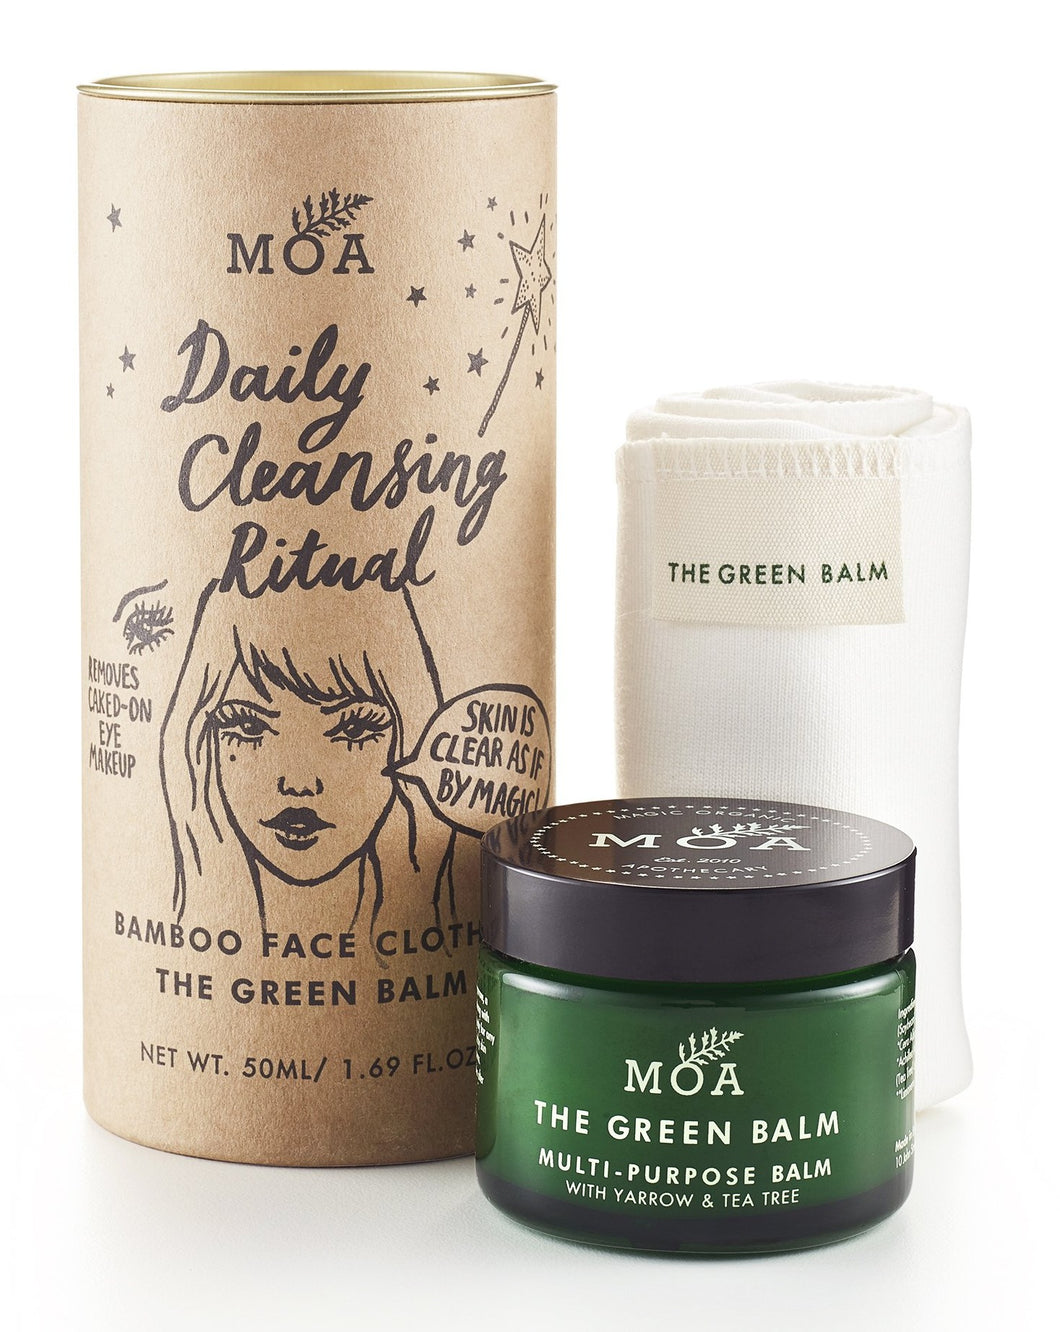 MOA Daily Cleansing Ritual- Hot Cloth Cleansing Kit